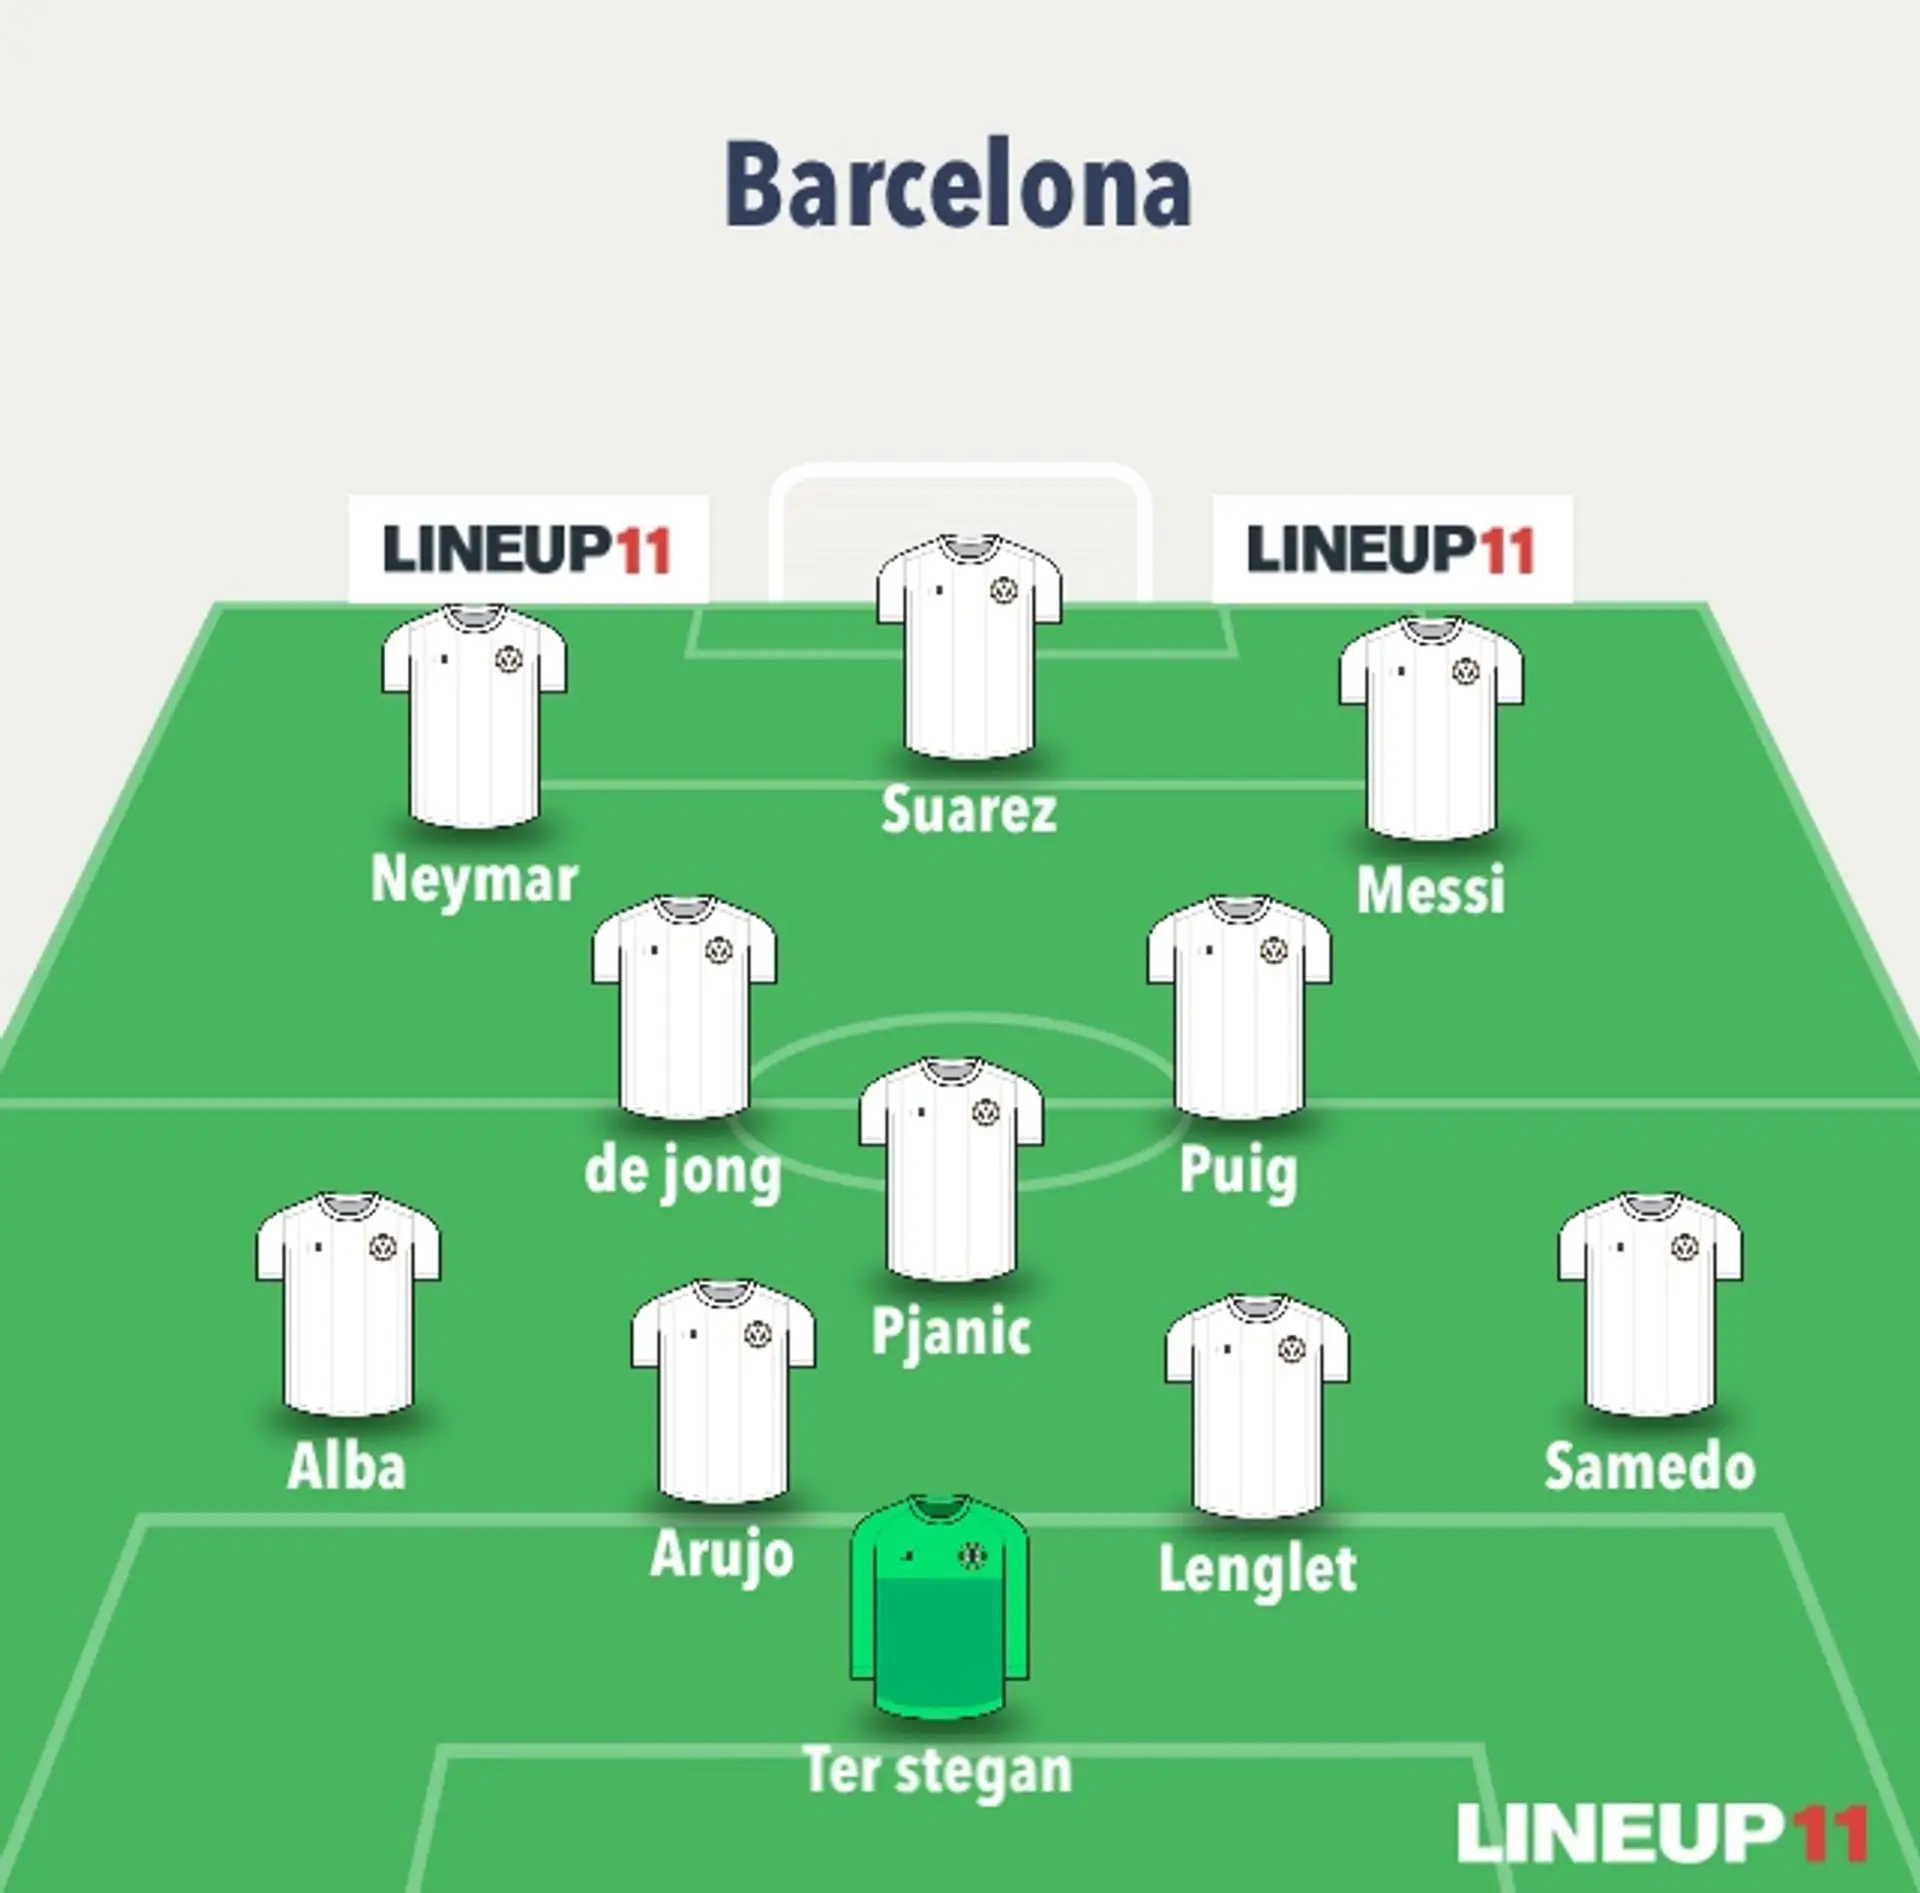 Choose your best starting XI for the next season!